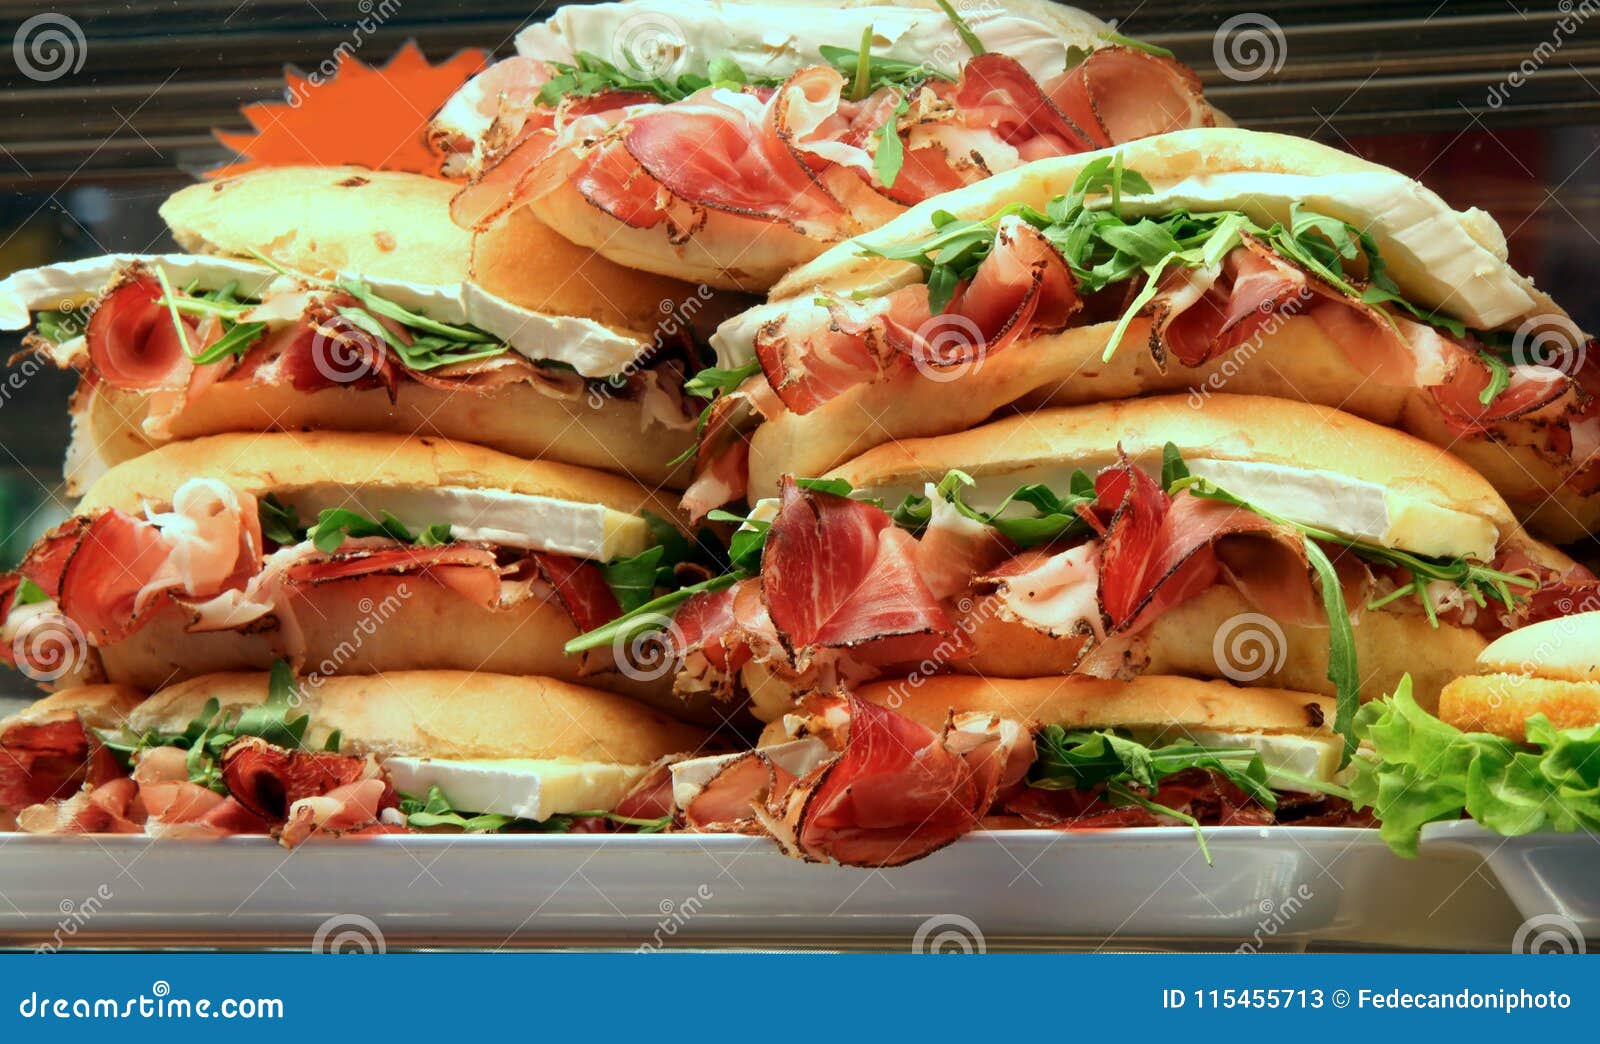 2,270 Sale Sandwich Stock - Free & Royalty-Free Stock Photos from Dreamstime